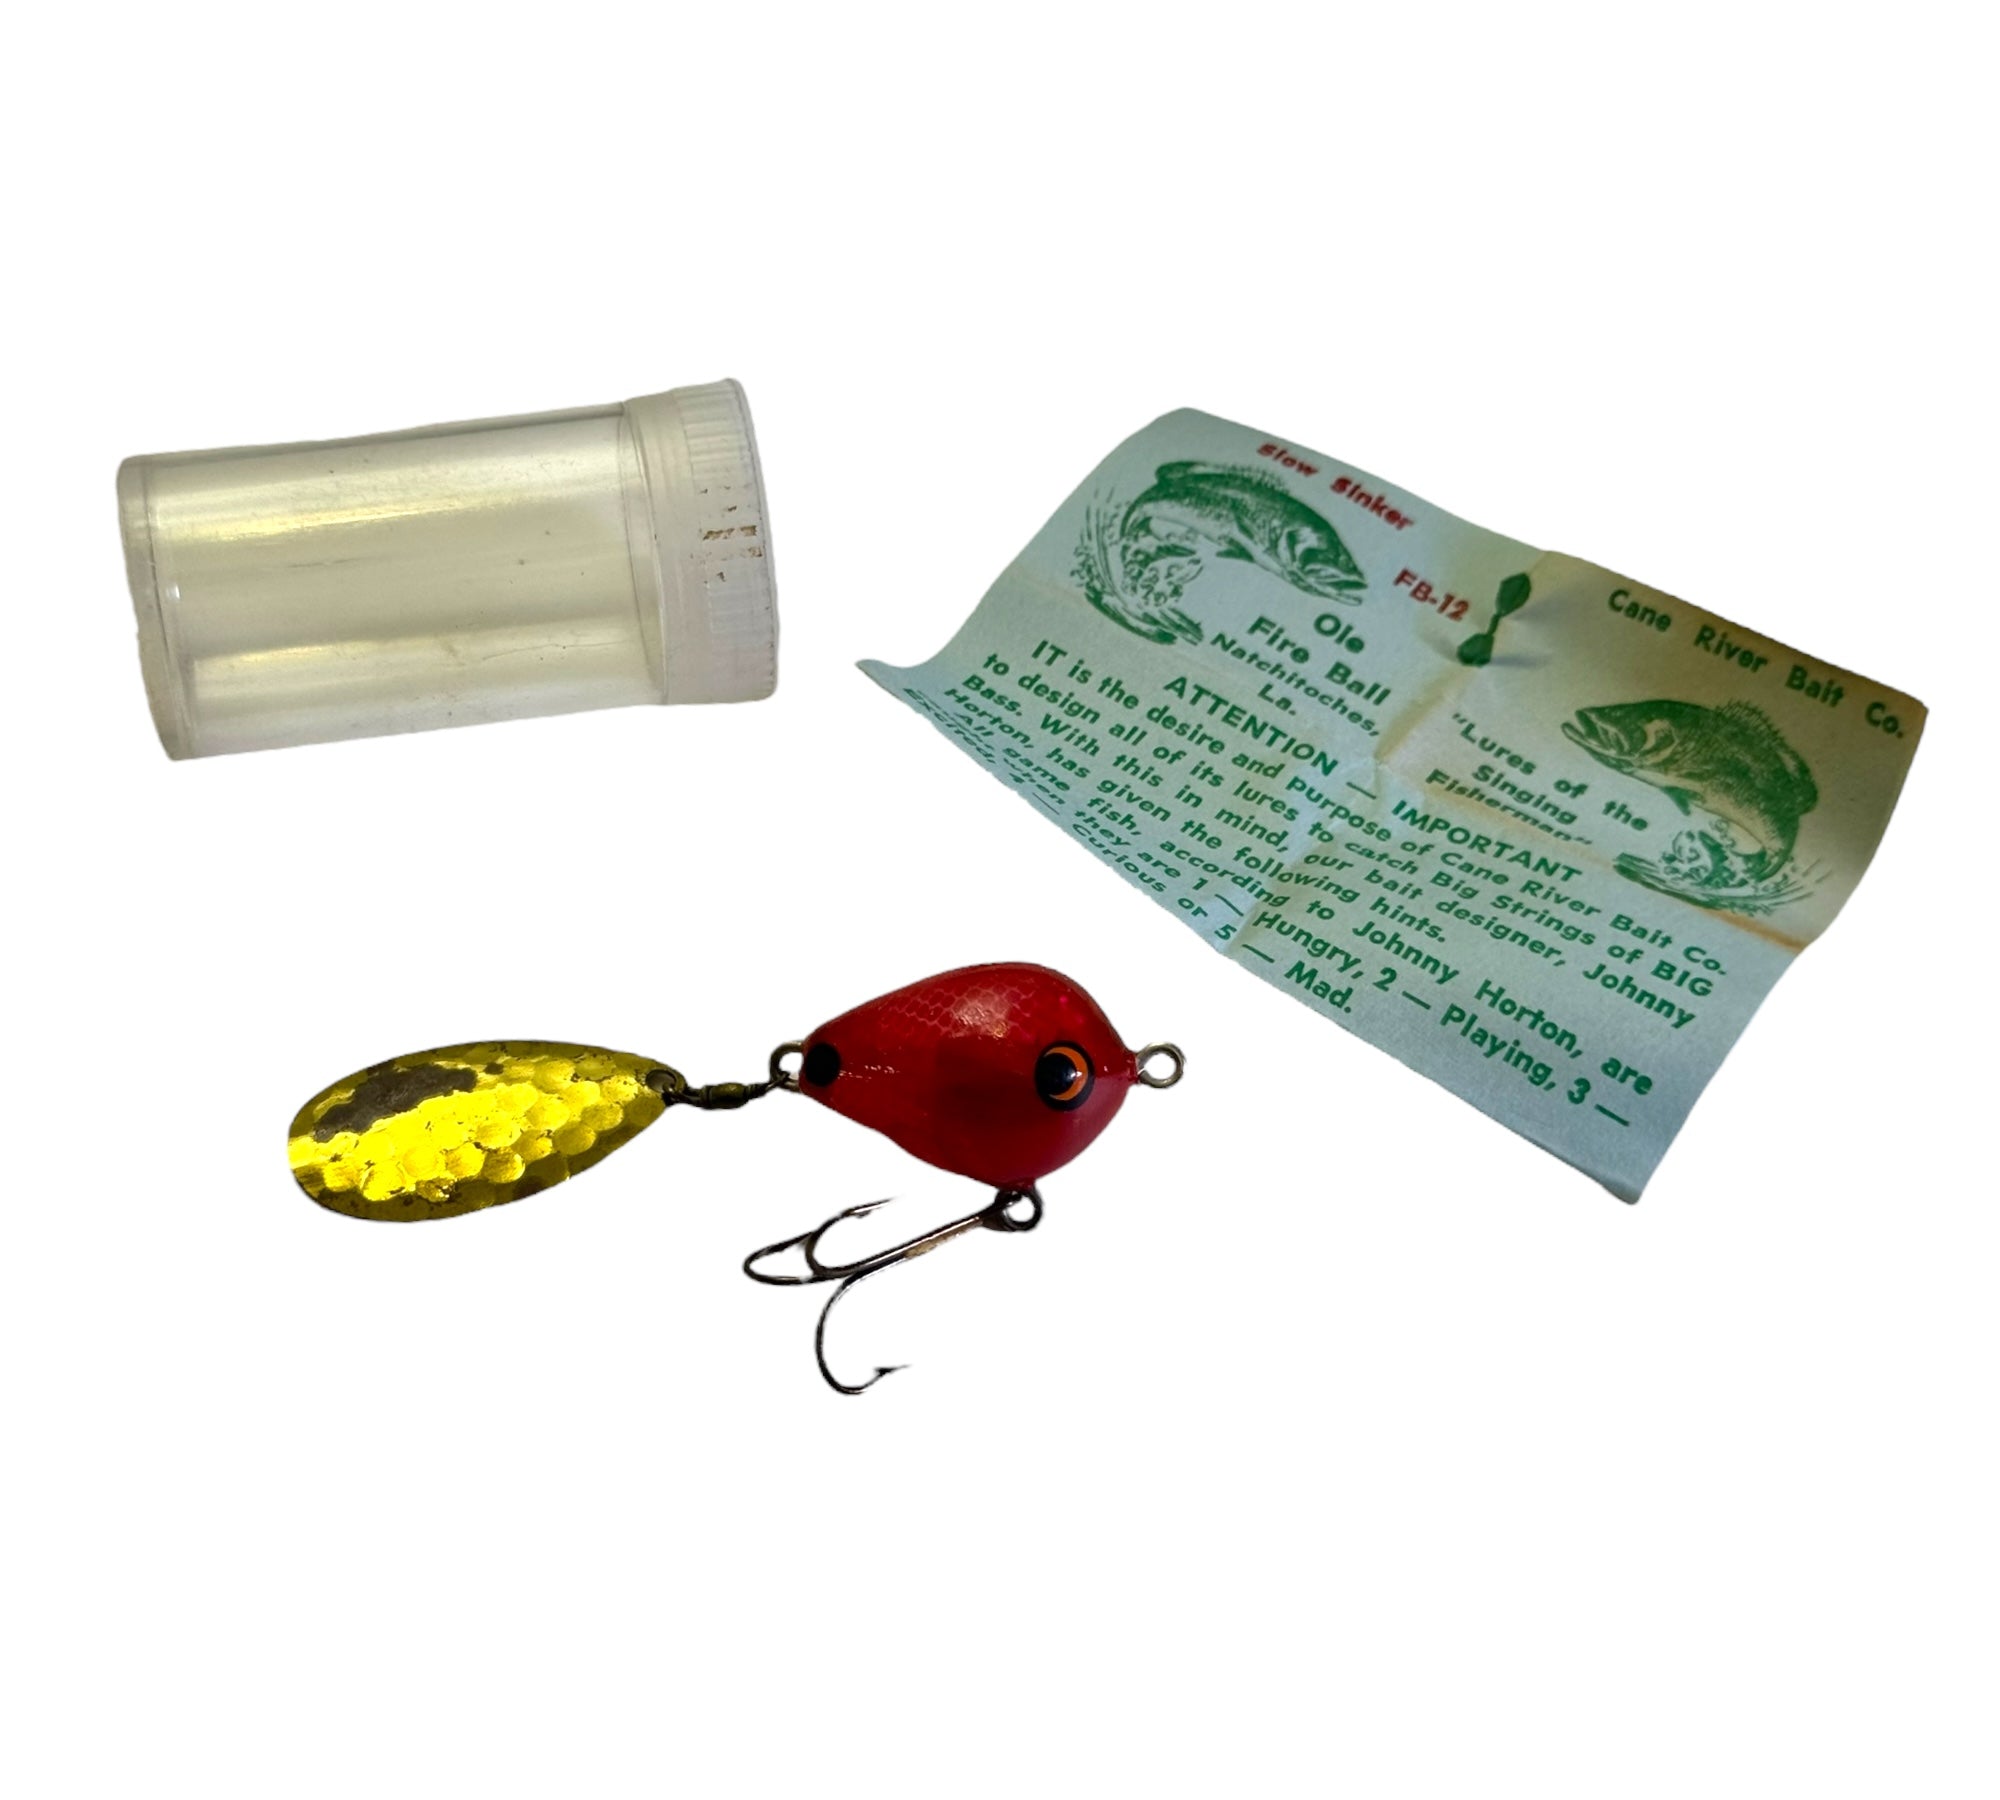 CANE RIVER BAIT CO. OLE FIRE BALL Fishing Lure • JOHNNY CASH